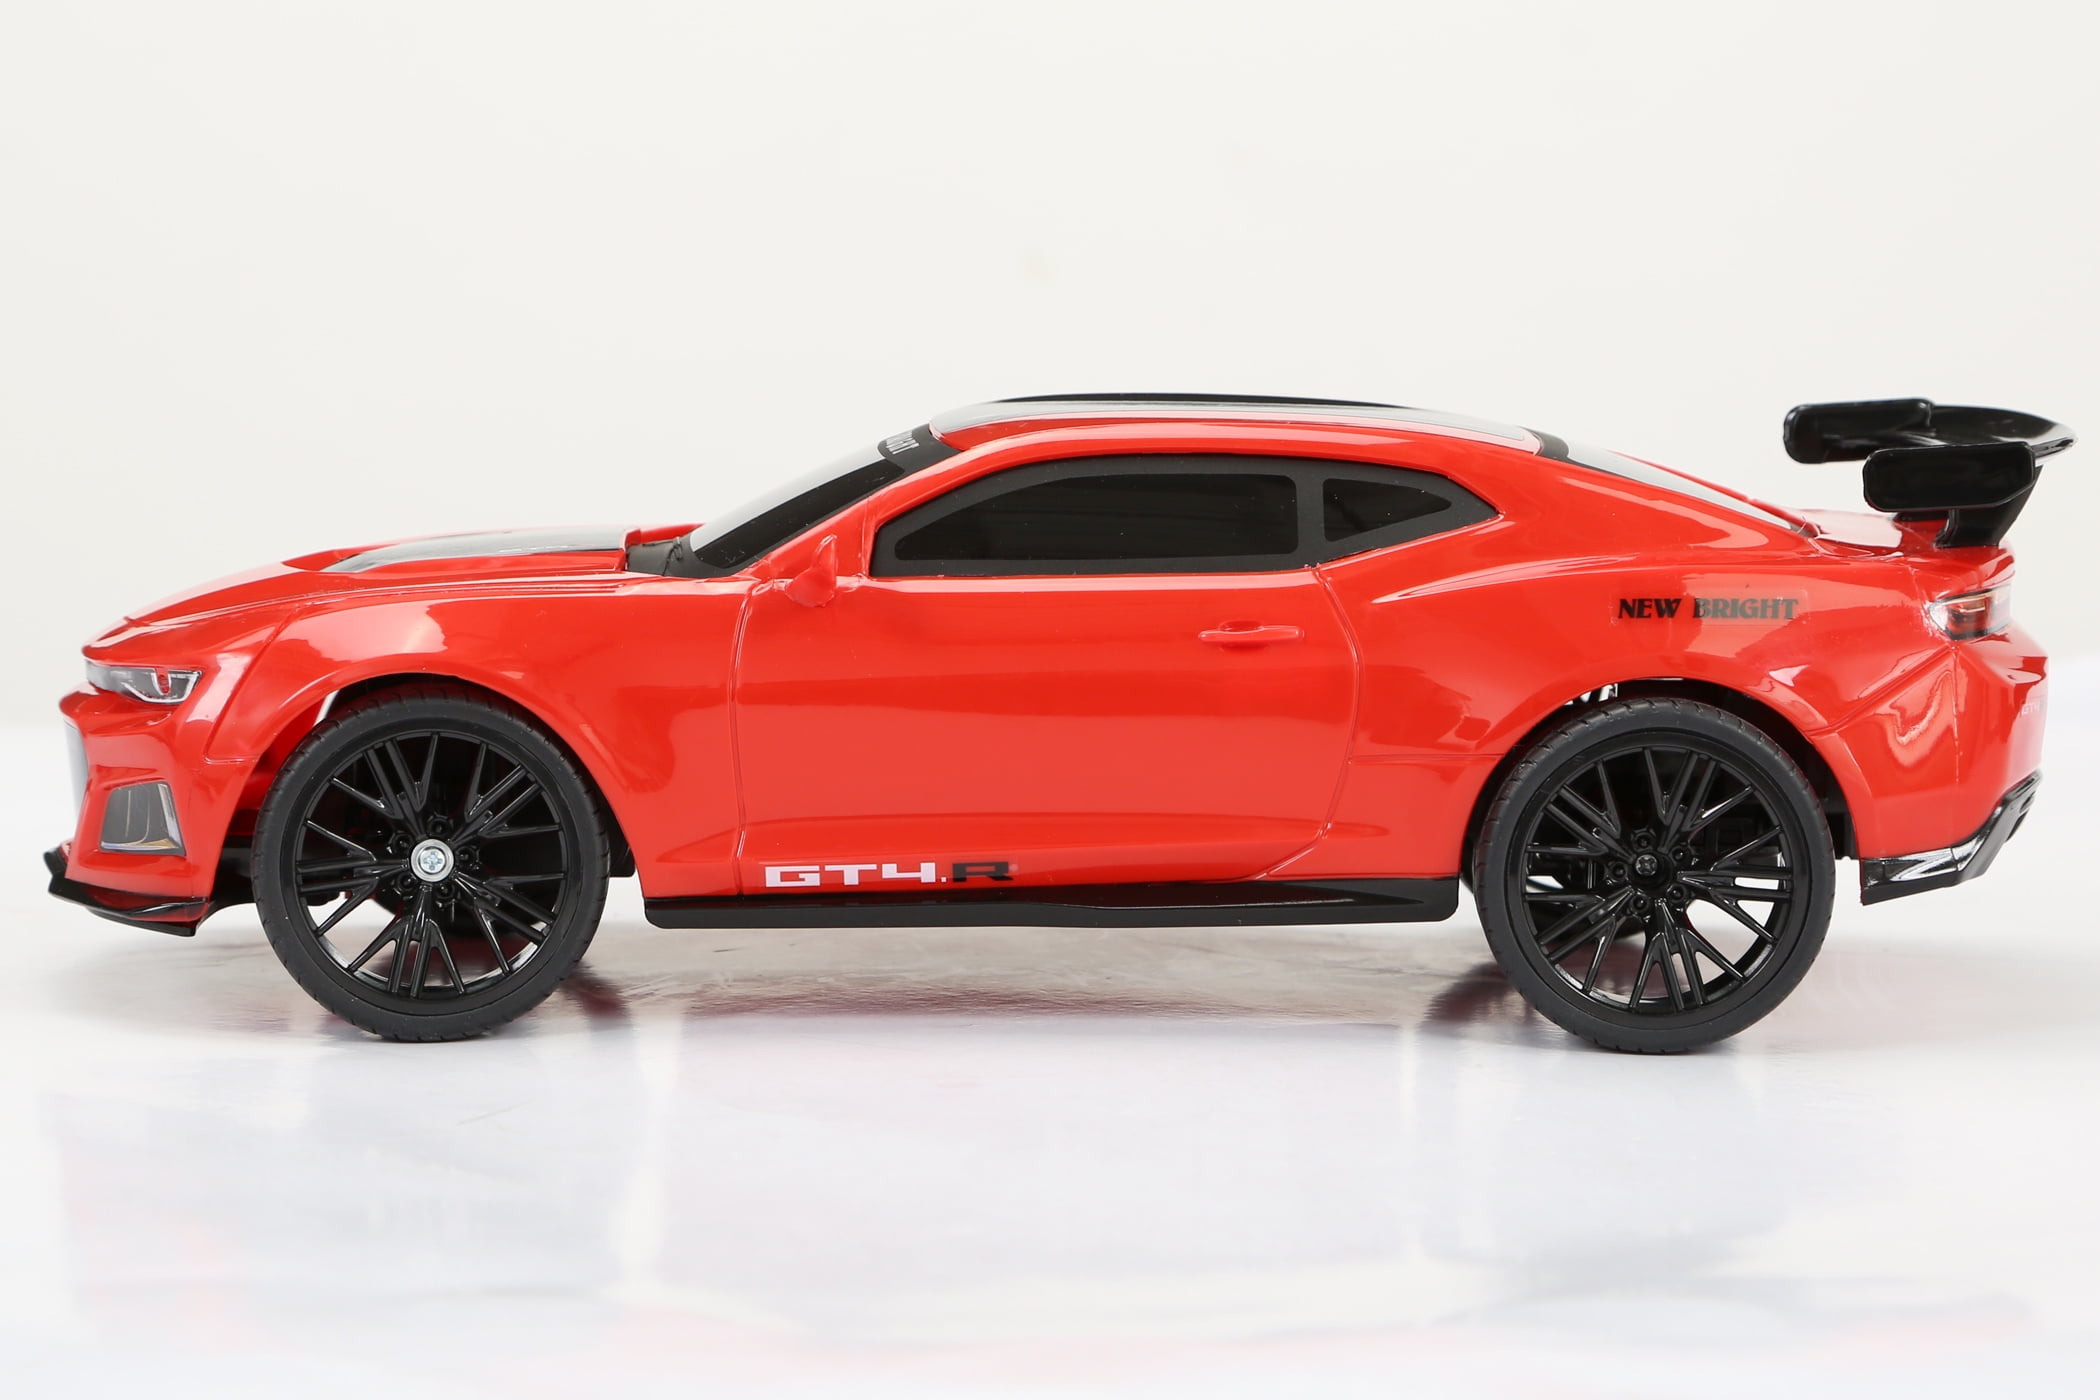 Red New Bright 1:12 RC Chargers Camaro SS Remote Control Car 